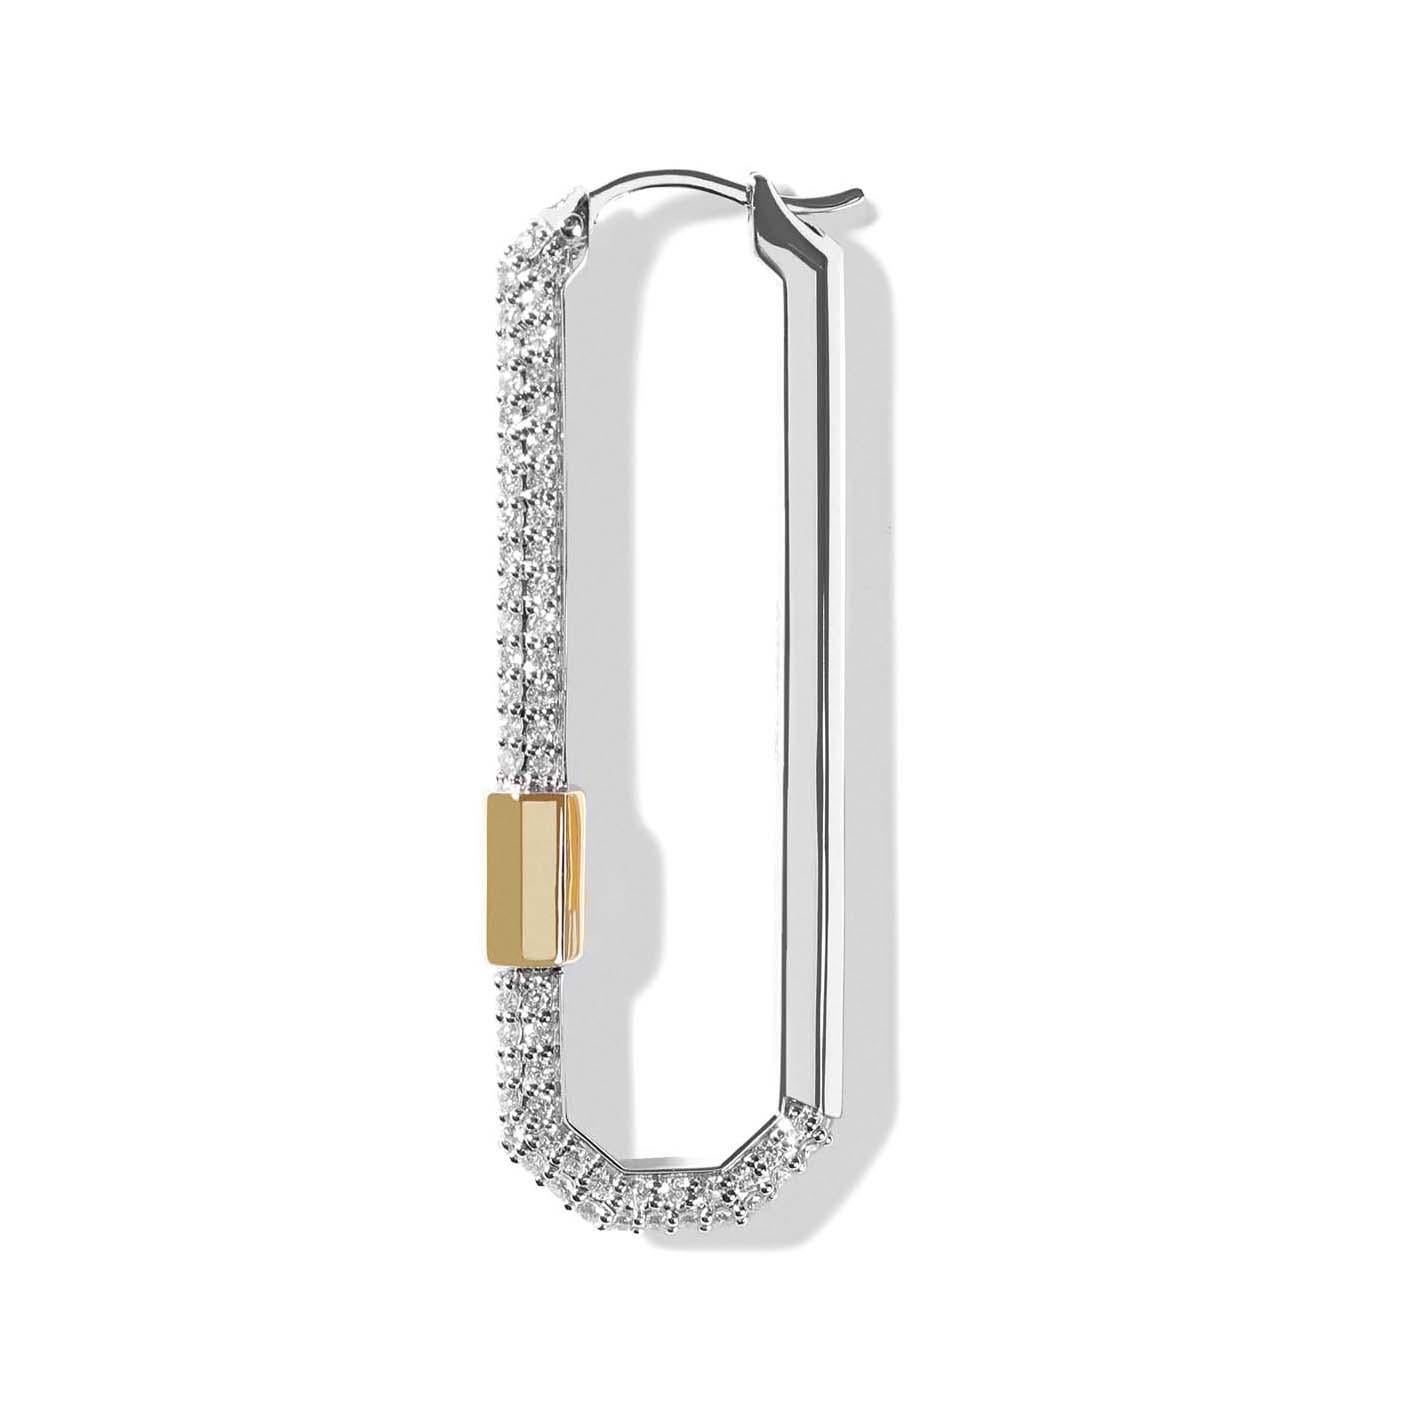 This Lock earring will add a cool edge to your AS29 jewellery collection.

Crafted in solid 18k gold, this earring is partially encrusted with pave diamonds and is finished with a solid gold barrel. A unique style, this earring will perfectly